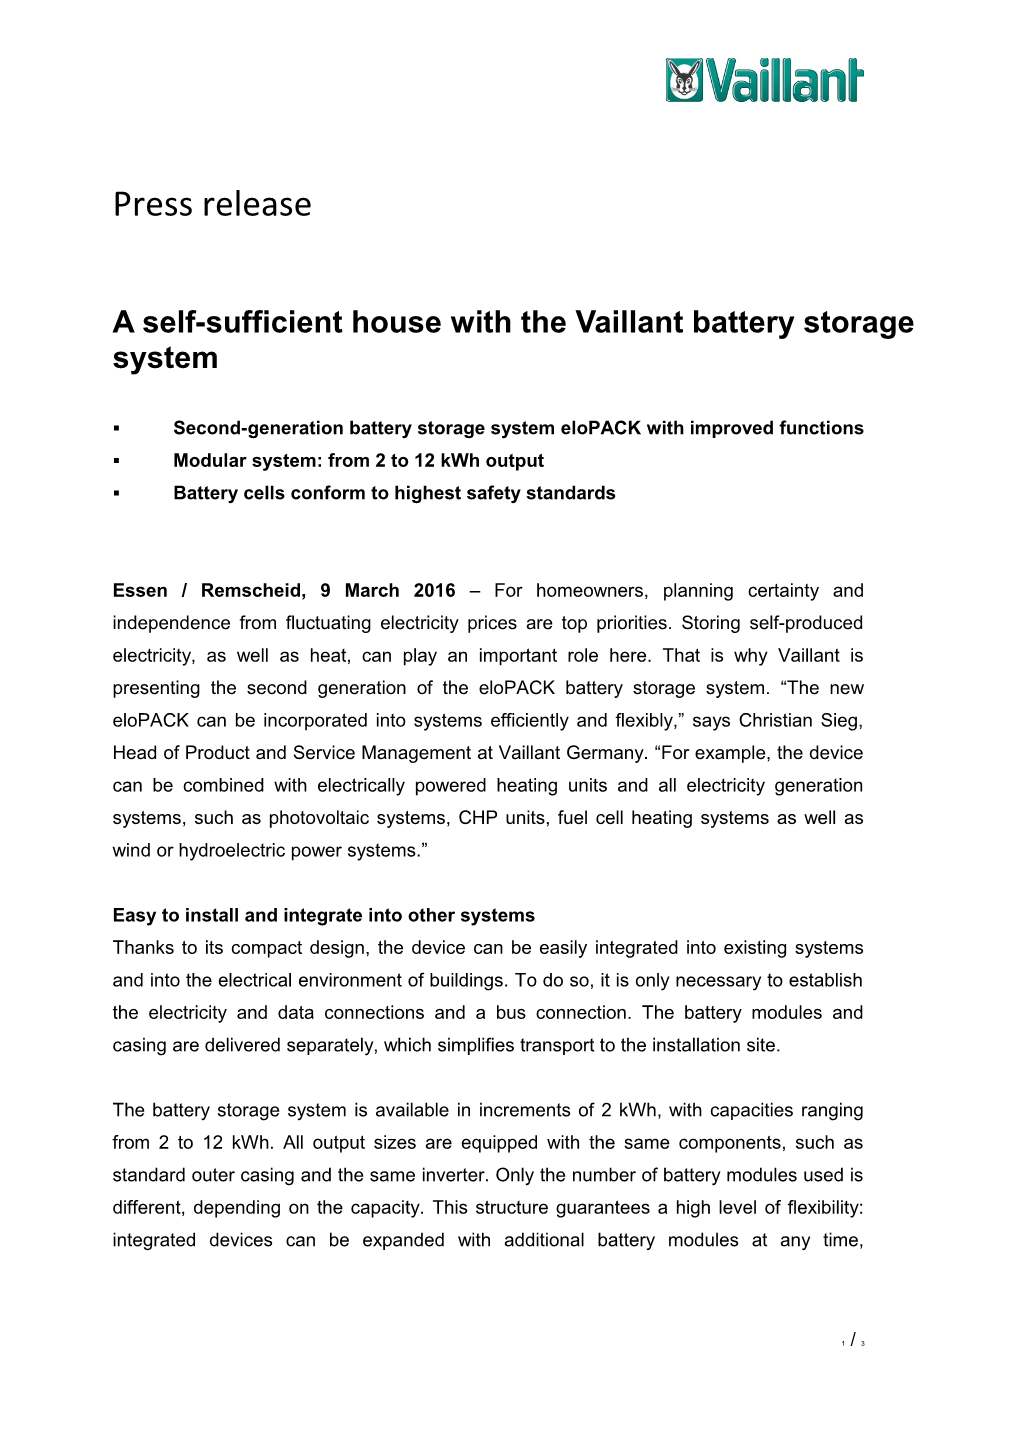 A Self-Sufficient House with the Vaillantbattery Storage System